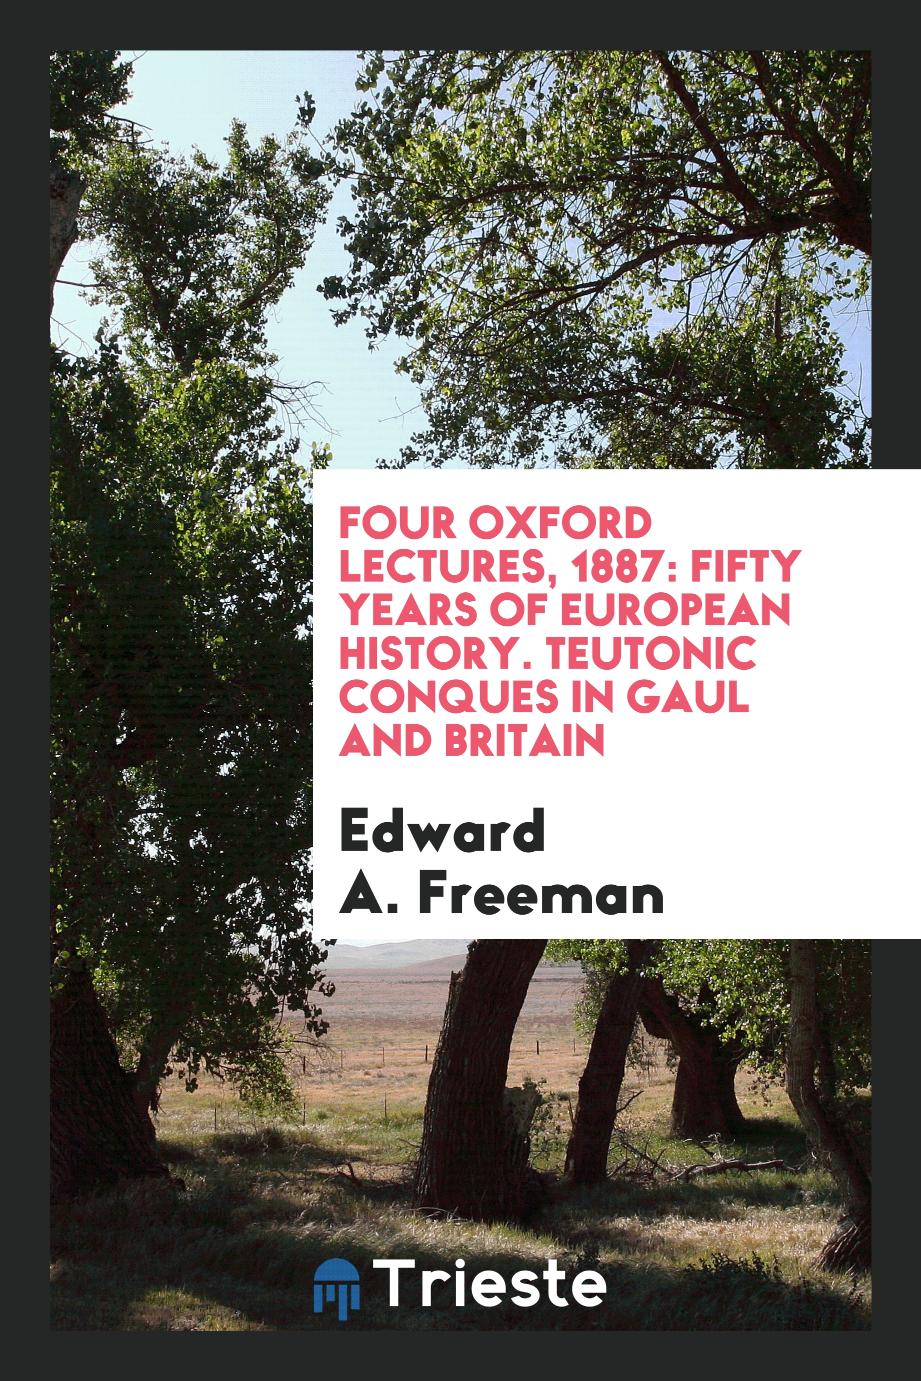 Four Oxford Lectures, 1887: Fifty Years of European History. Teutonic Conques in Gaul and Britain